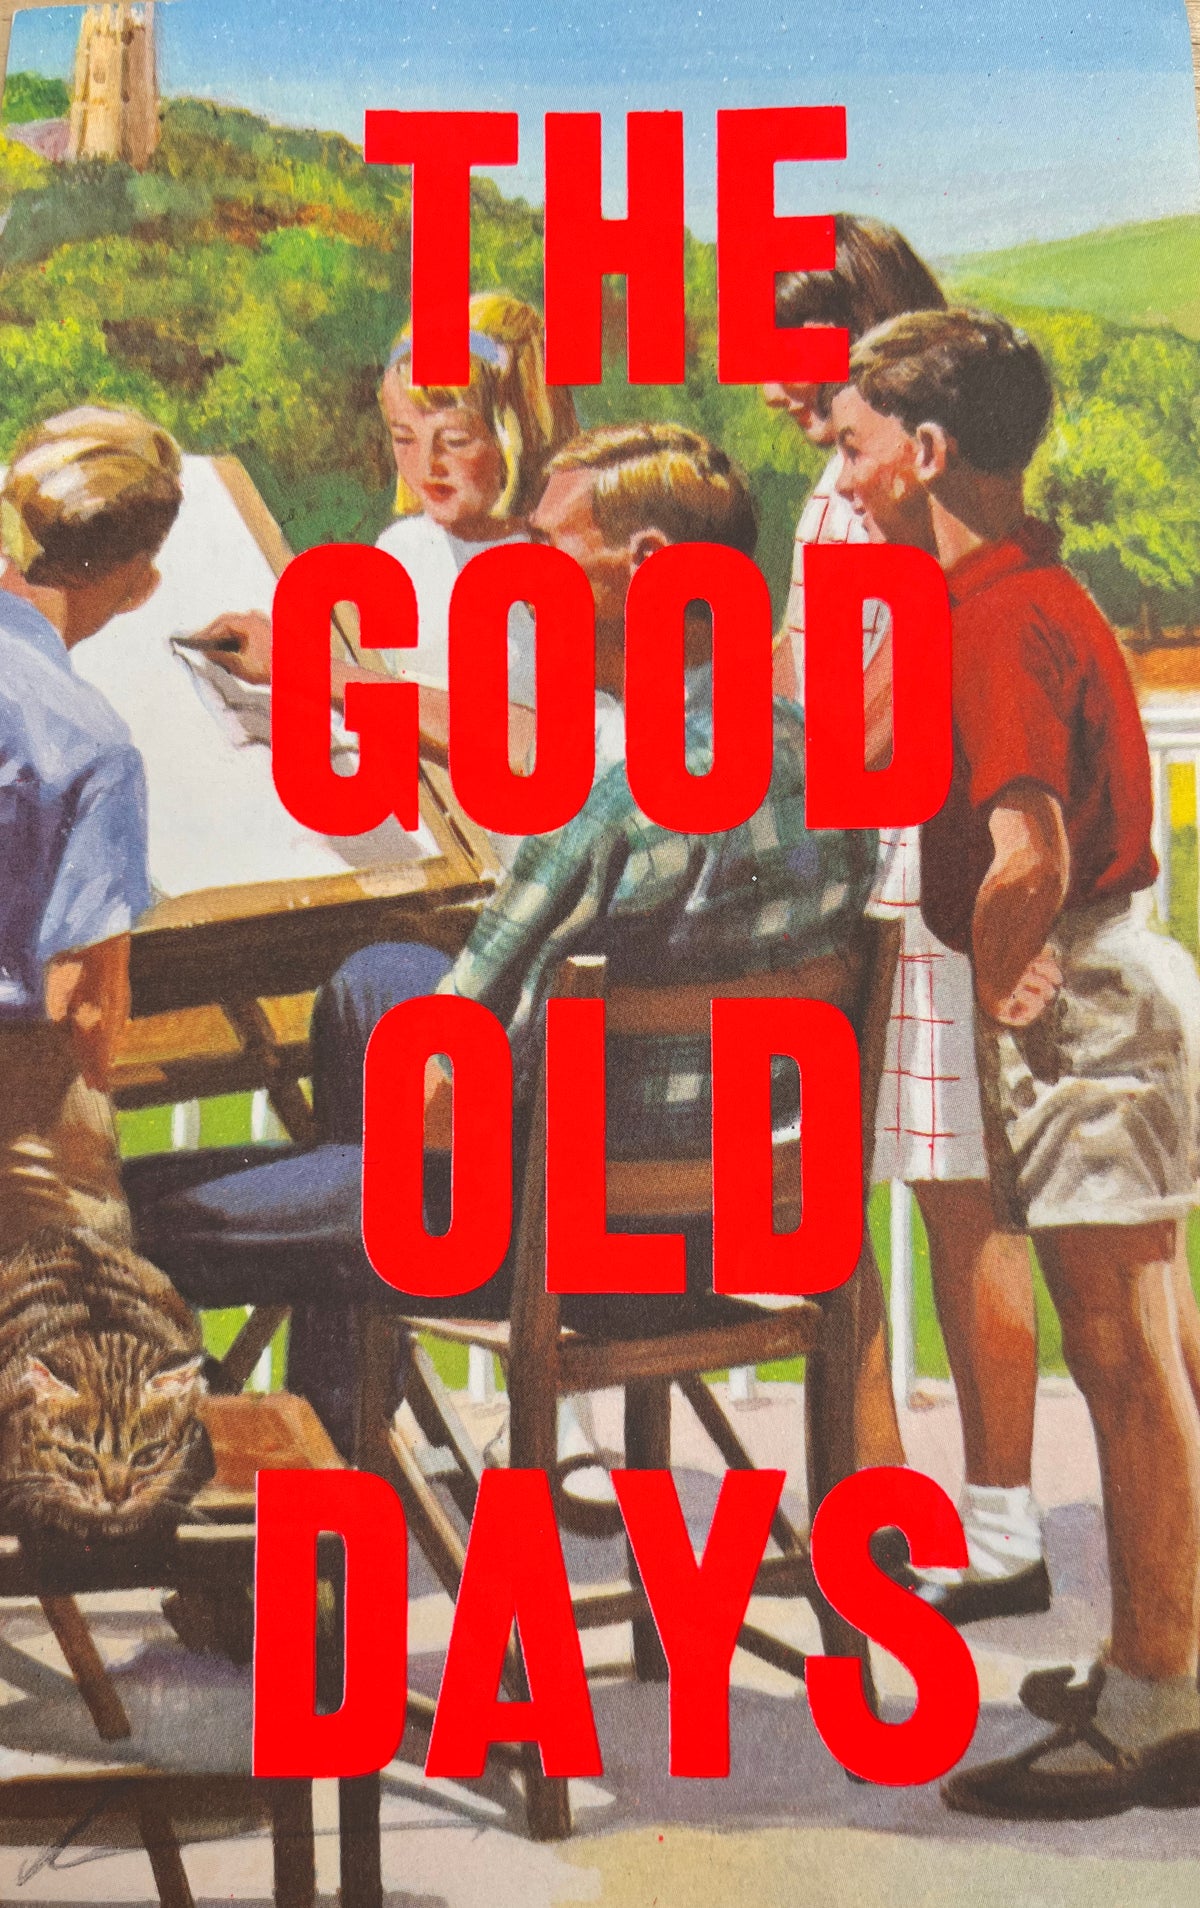 The Good Old Days by Dave Buonaguidi